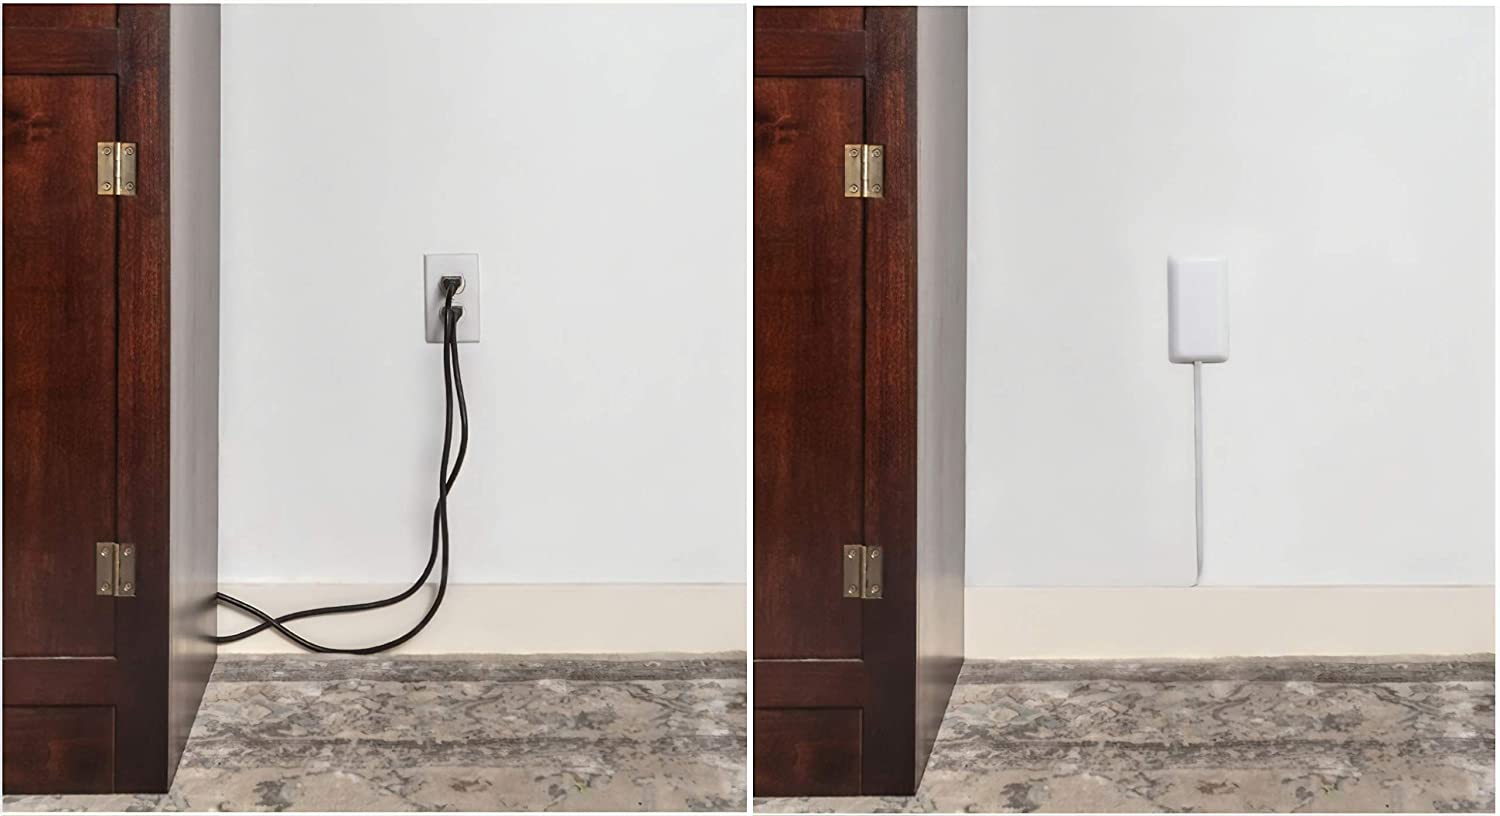 Sleek Socket Ultra-Thin Wall Outlet Cover with 8-ft Extension Cord